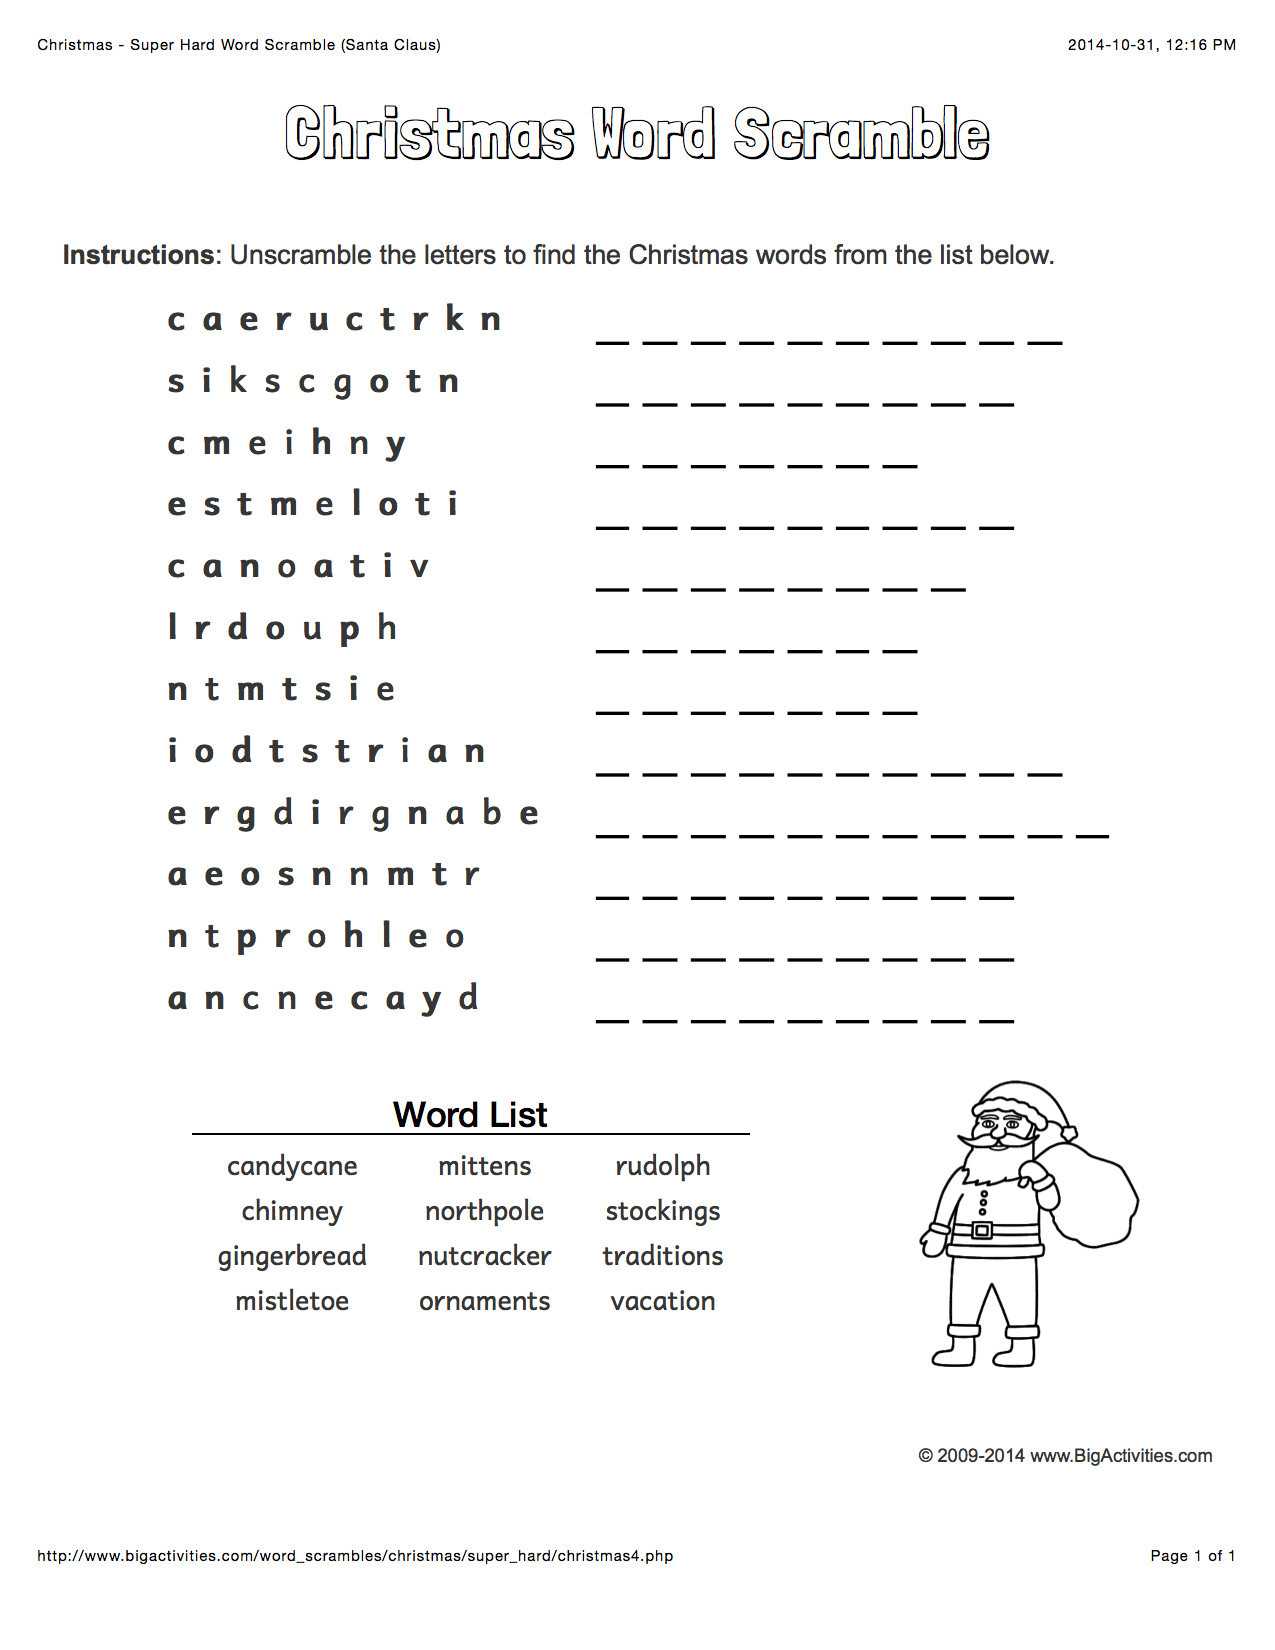 unscramble-words-worksheet-grade-2-printable-worksheets-and-activities-for-teachers-parents